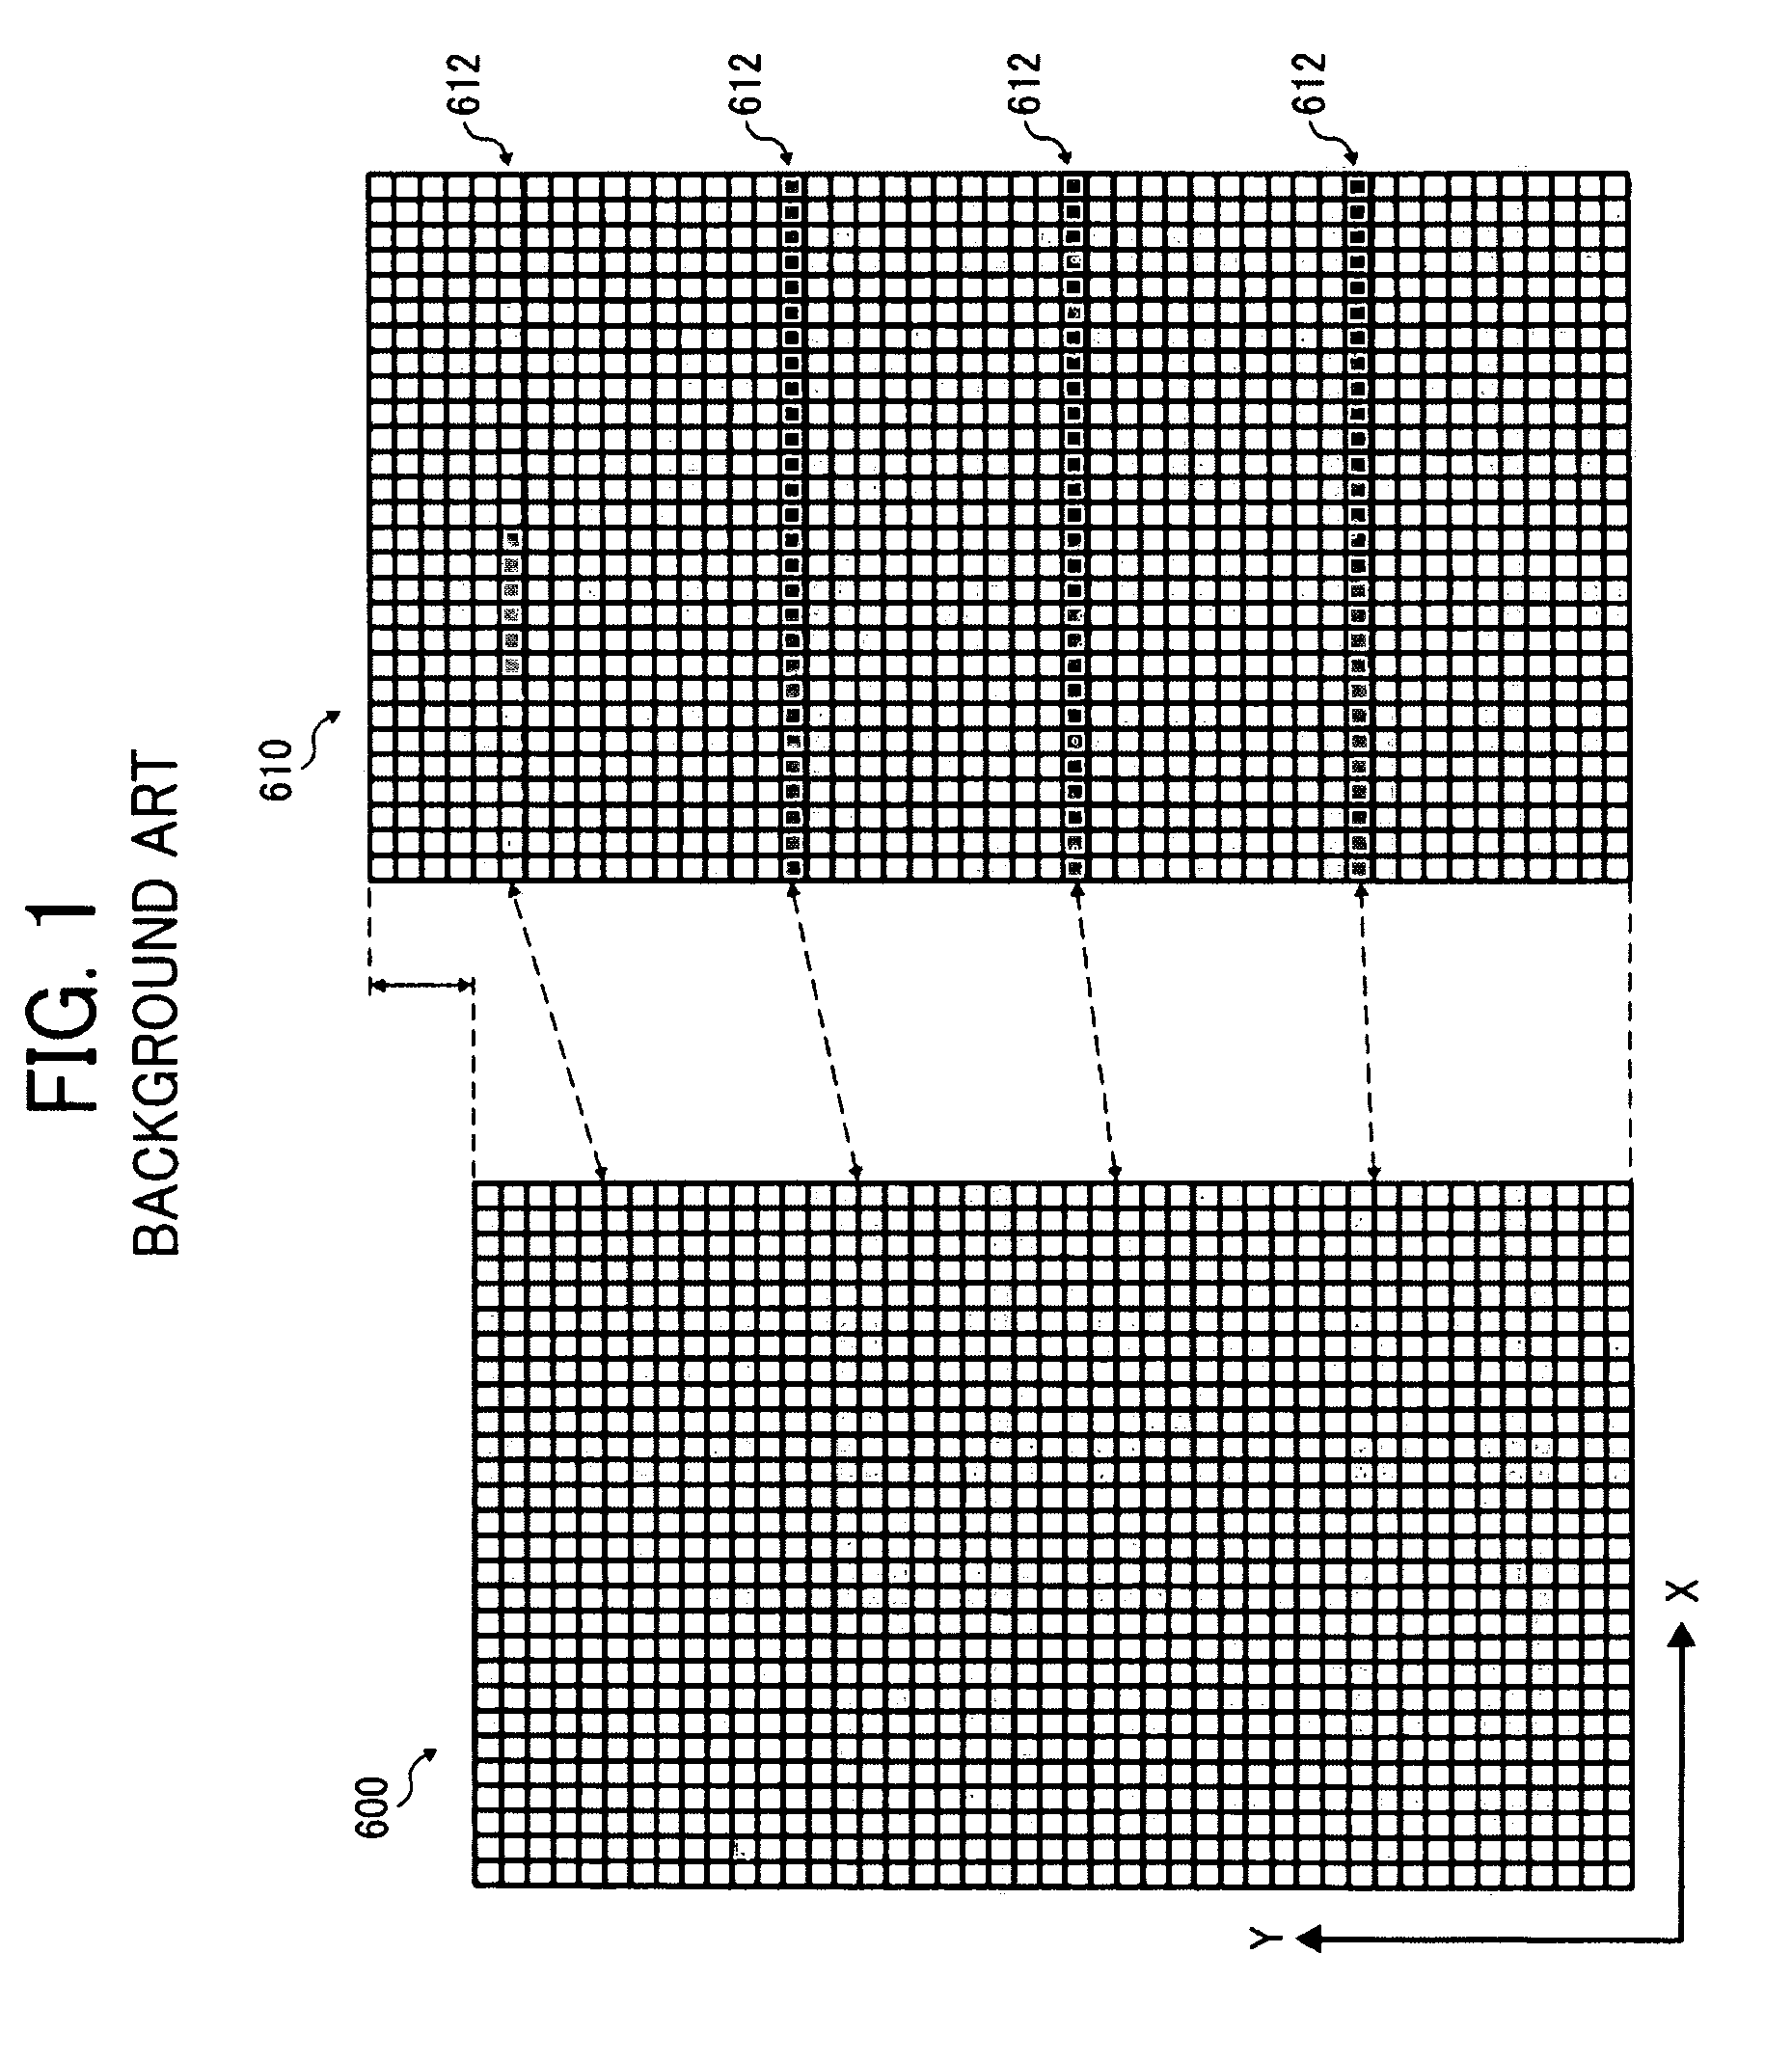 Image processing system and image forming apparatus incorporating same